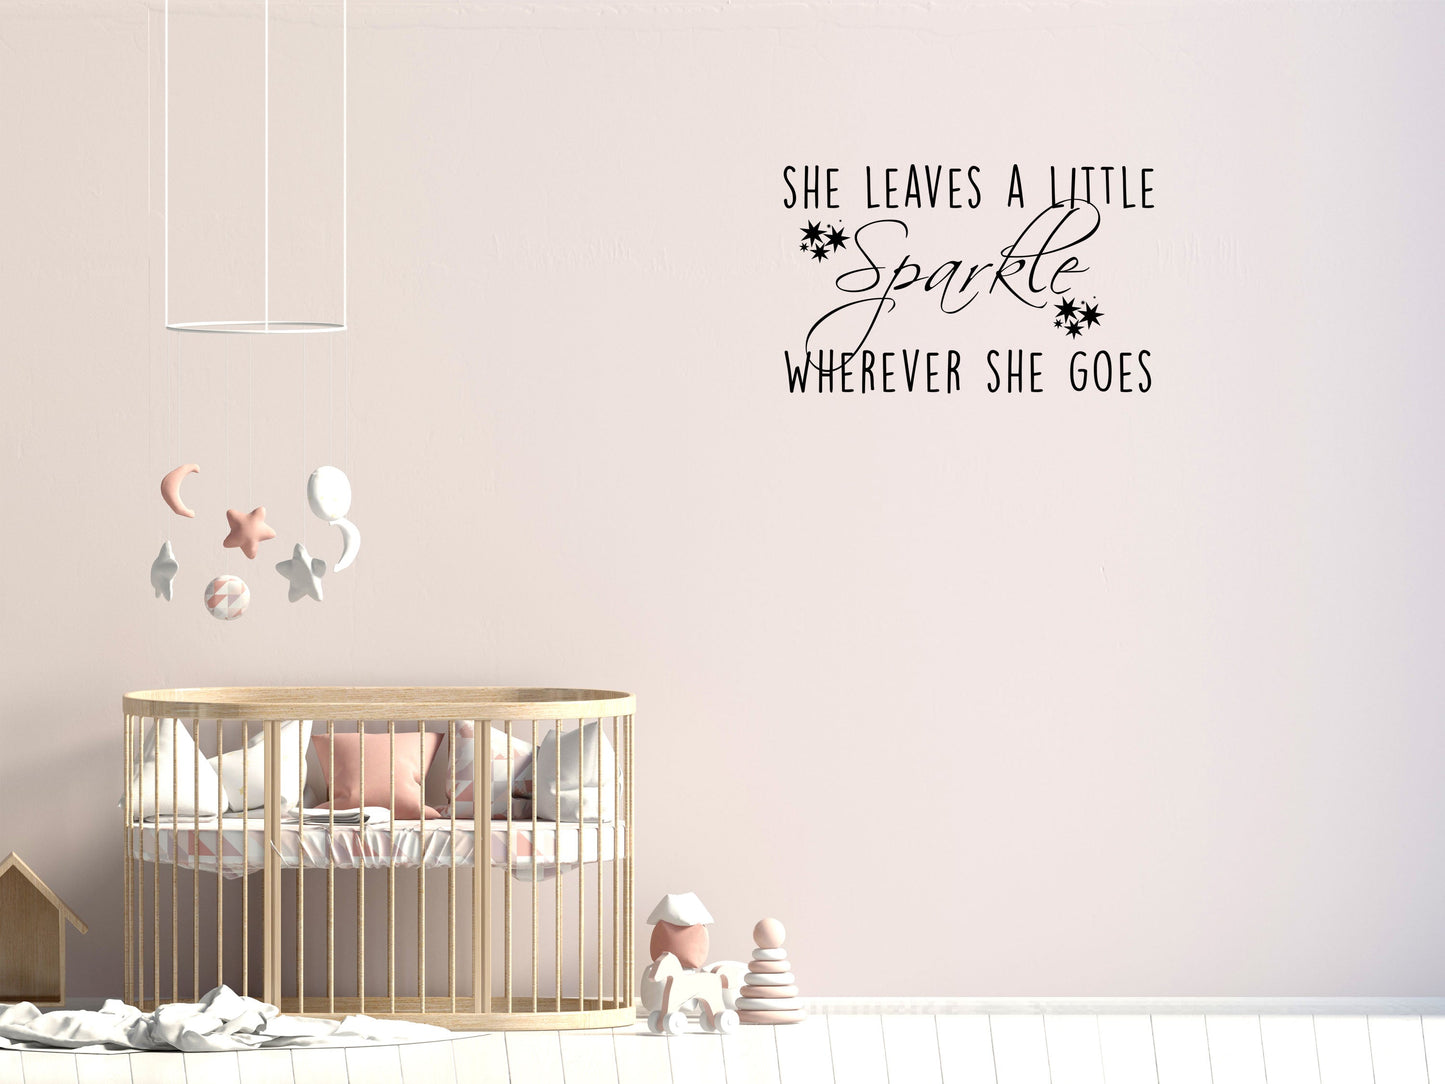 She Leaves A Little Sparkle Wherever She Goes Vinyl Wall Decal Inspirational Wall Signs 